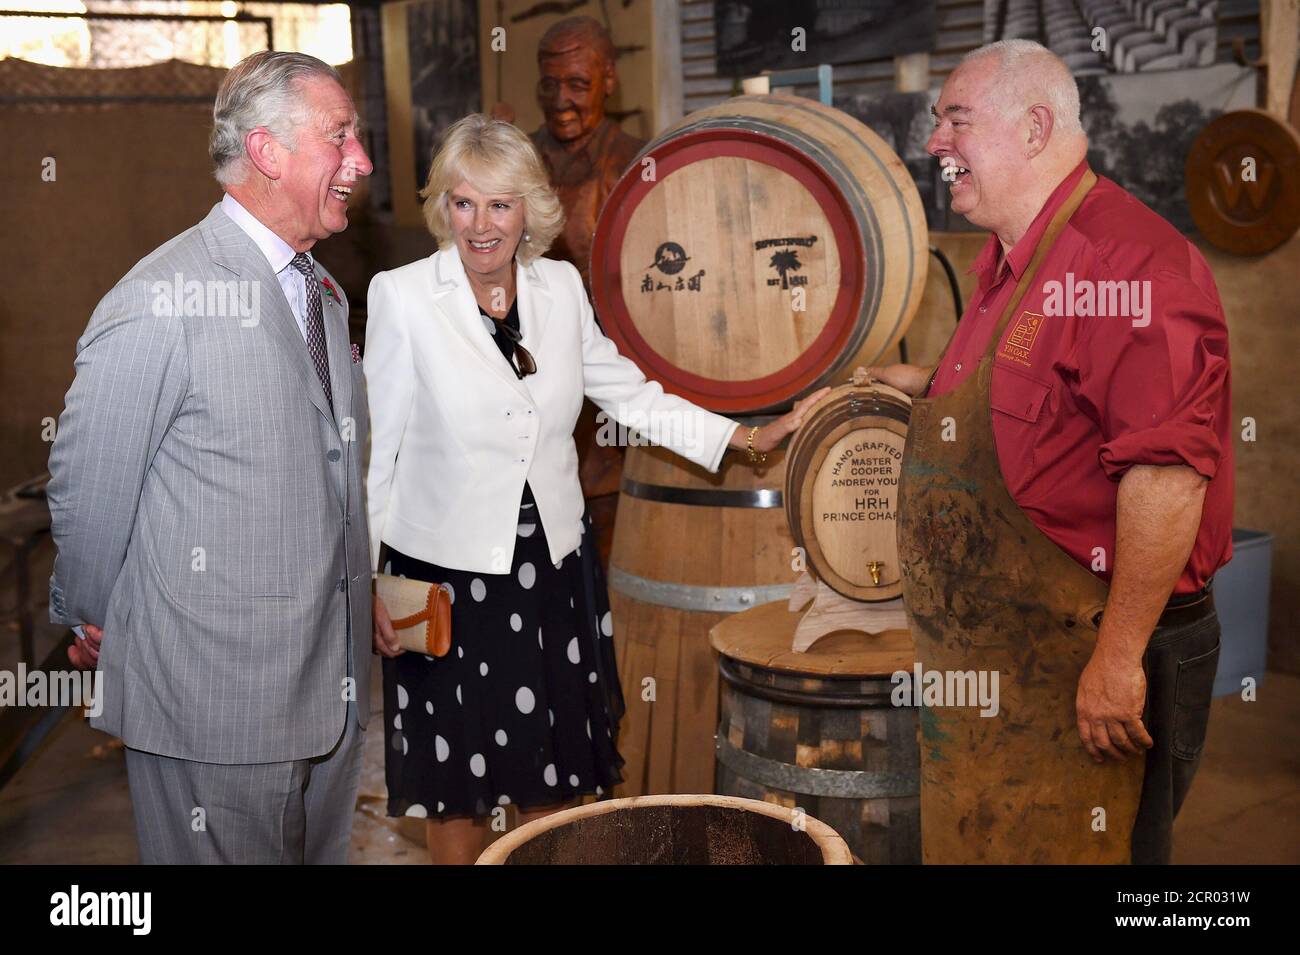 Britain's Prince Charles and Camilla, Duchess of Cornwall, visit Seppeltsfield Winery in the Barossa Valley of South Australia, November 10, 2015. REUTERS/Daniel Kalisz/Pool Stock Photo